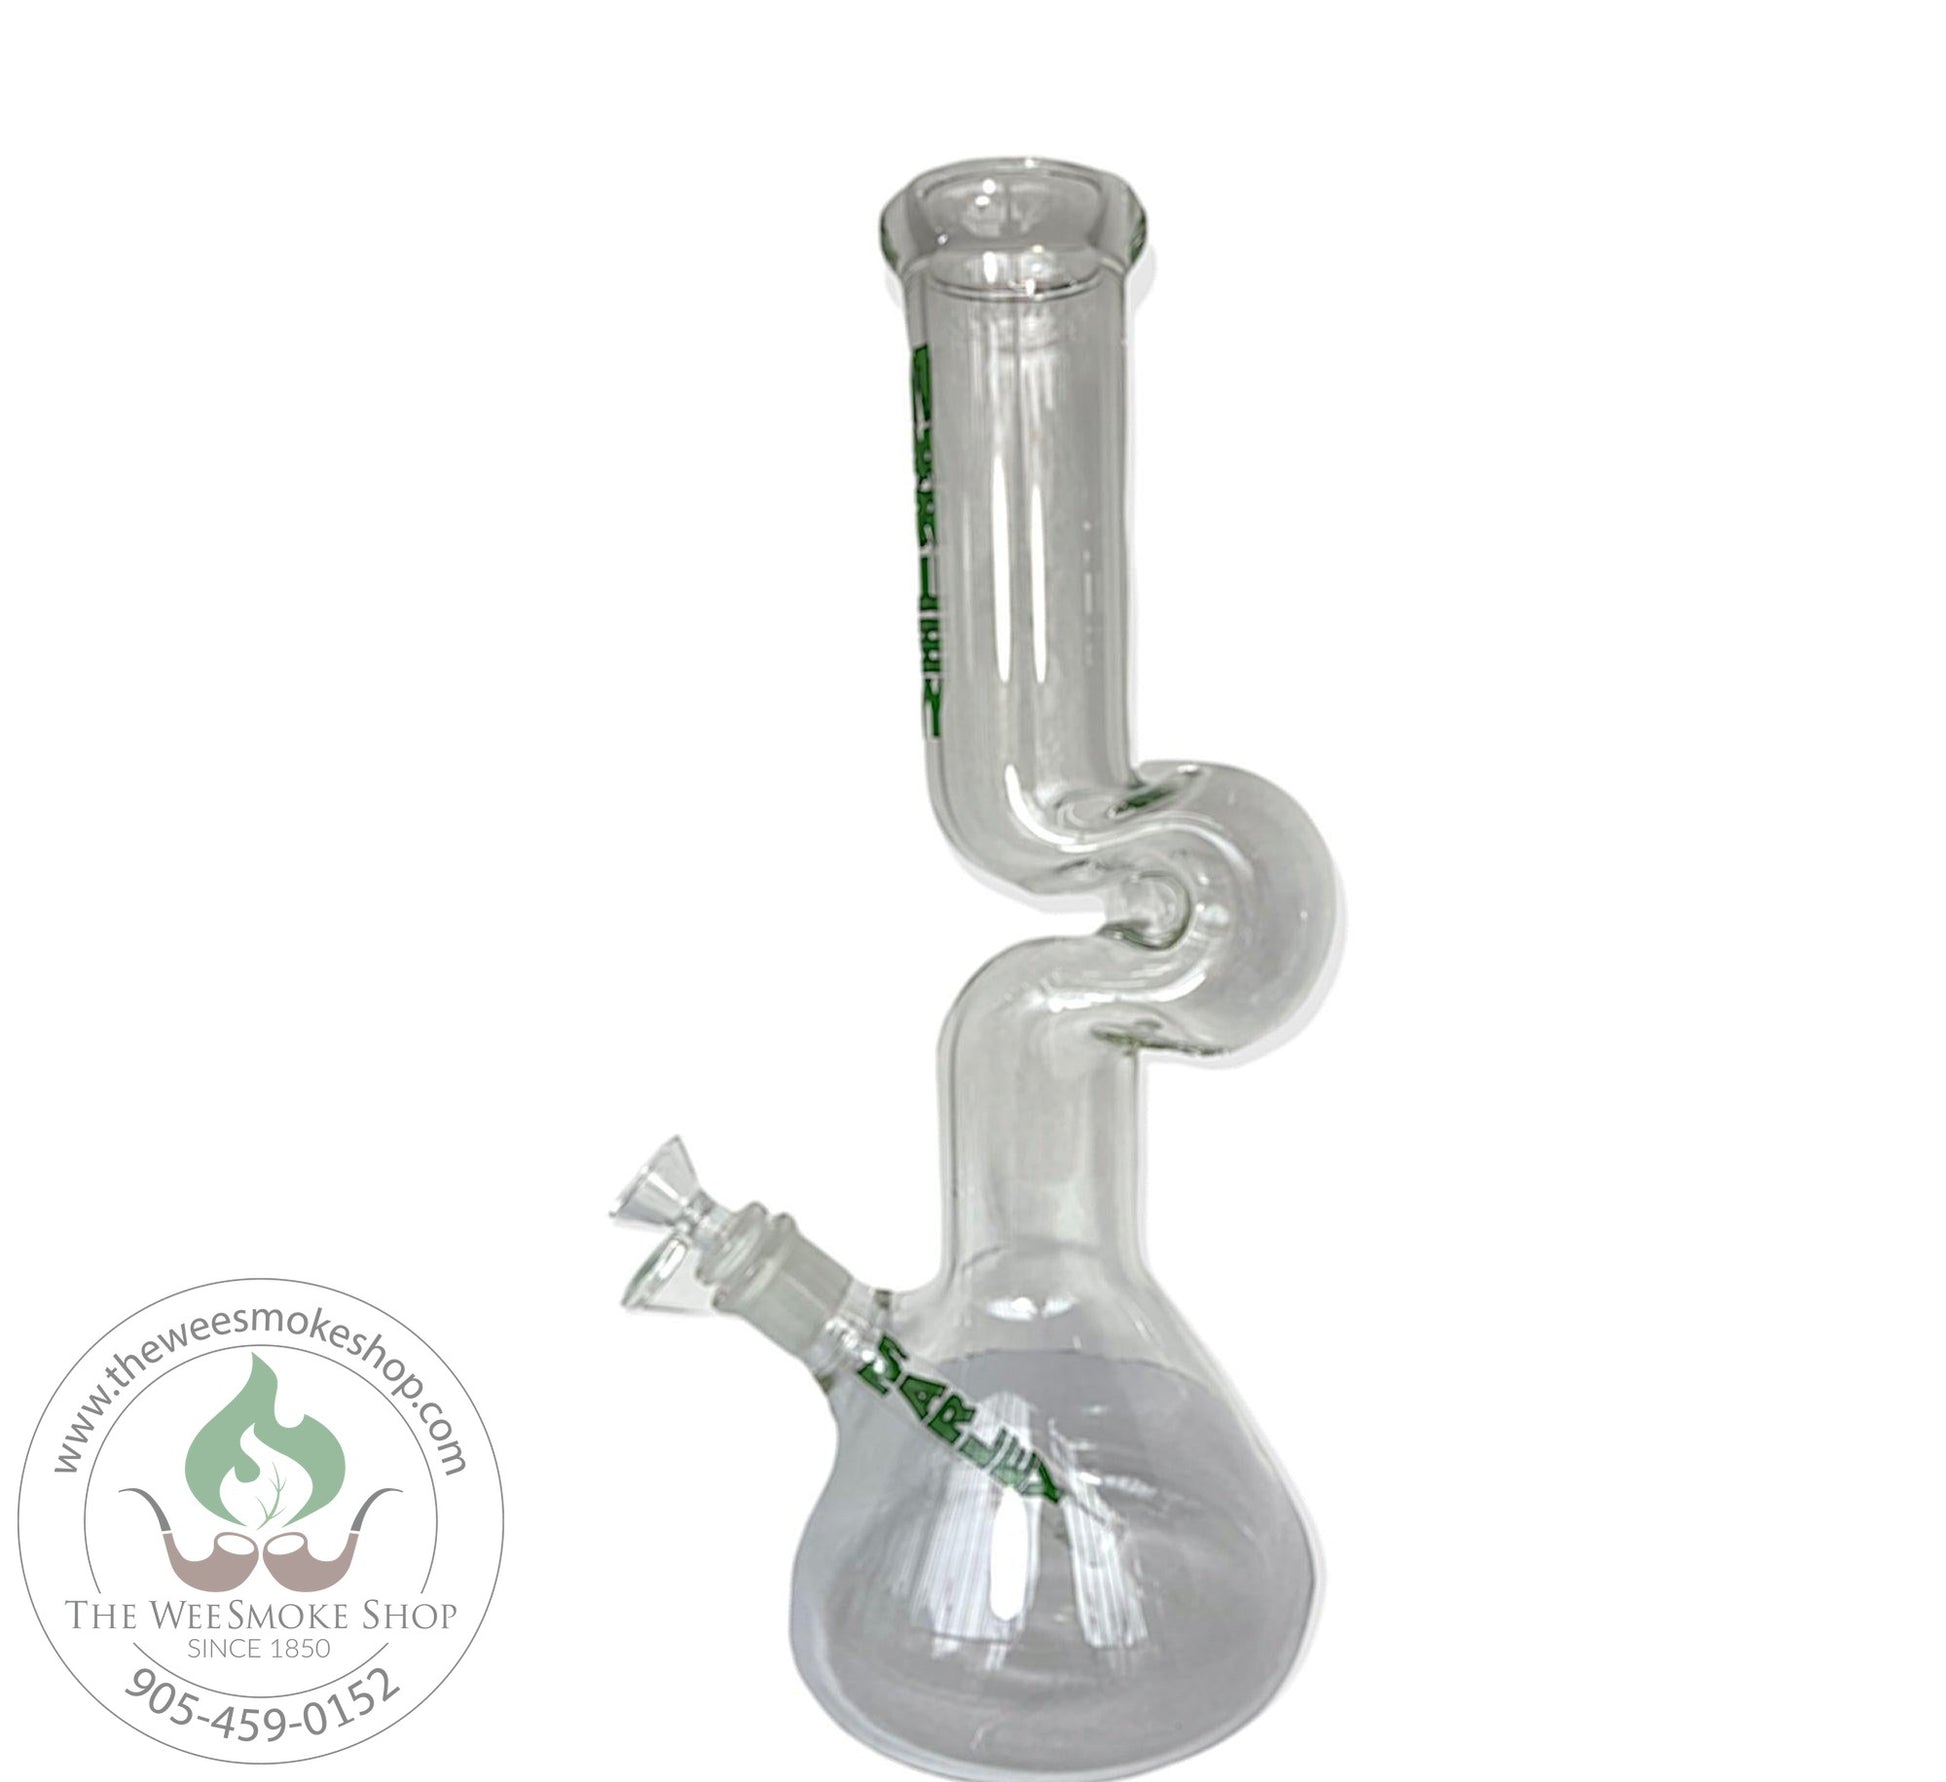 Green Marley 14" One Tier Rounded Bottom Zong - Glass Bong - The Wee Smoke Shop